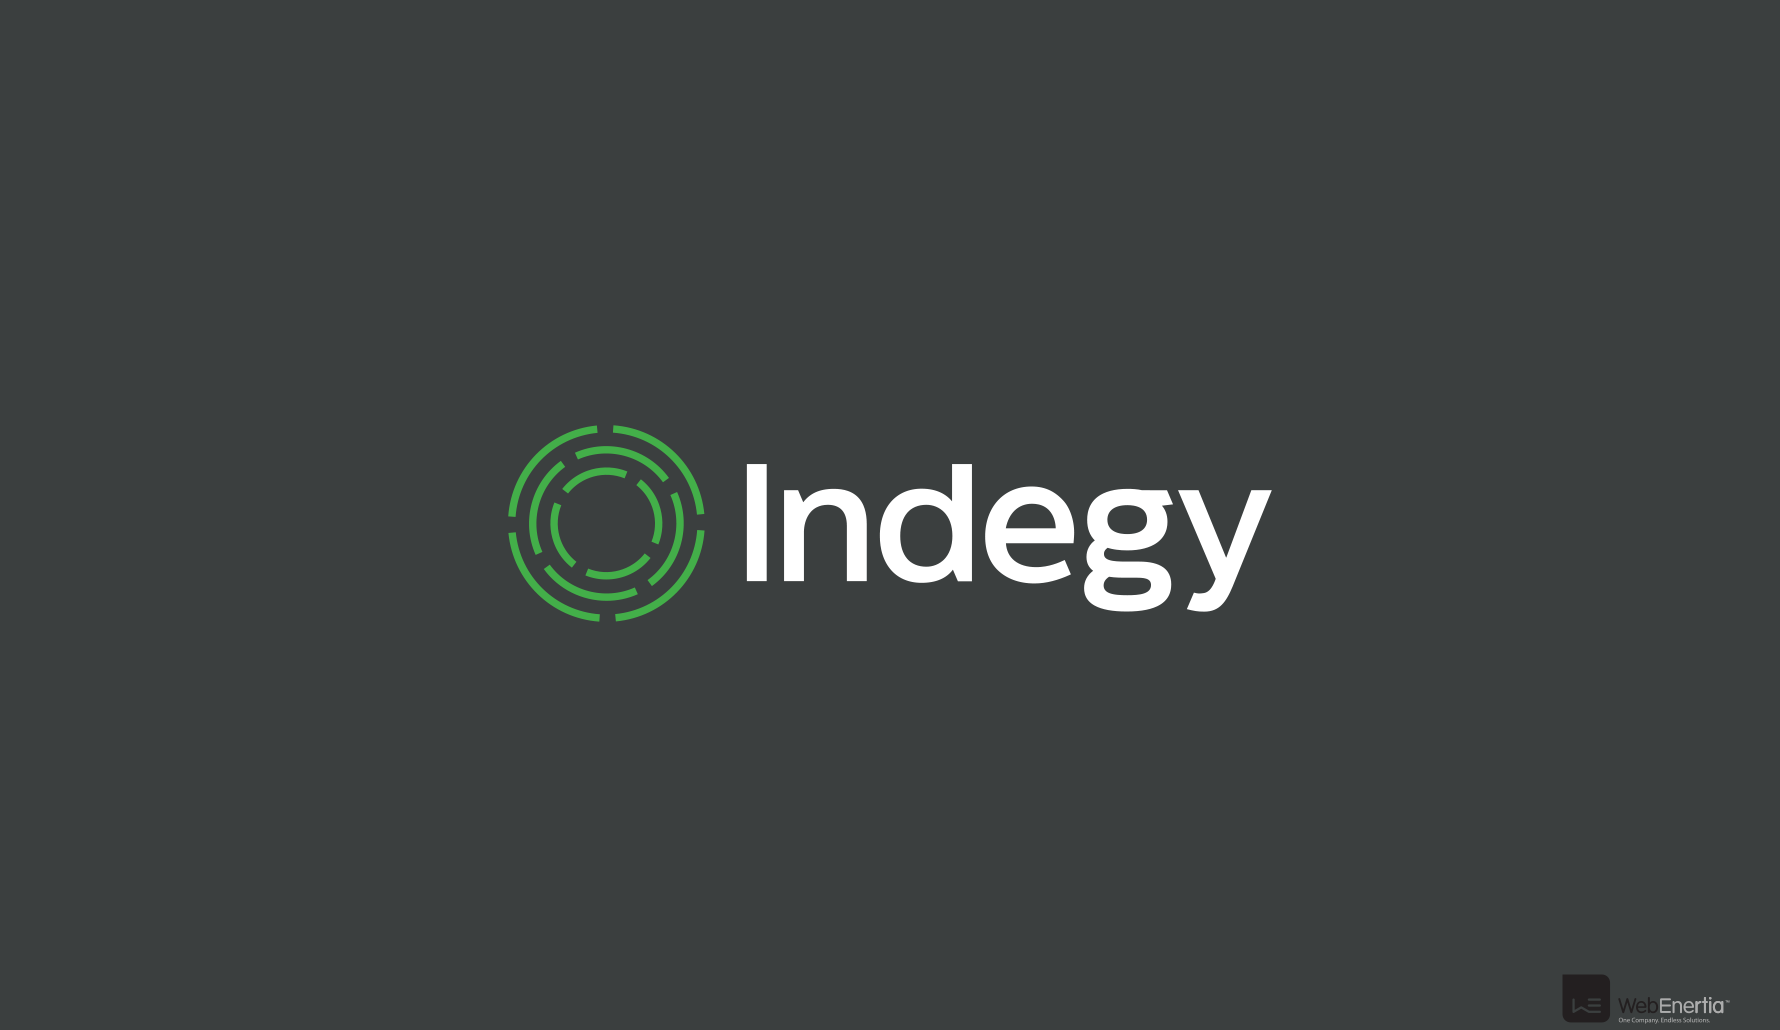 Indegy Brand Update & Guidelines Indegy in white text with green circular maze logo